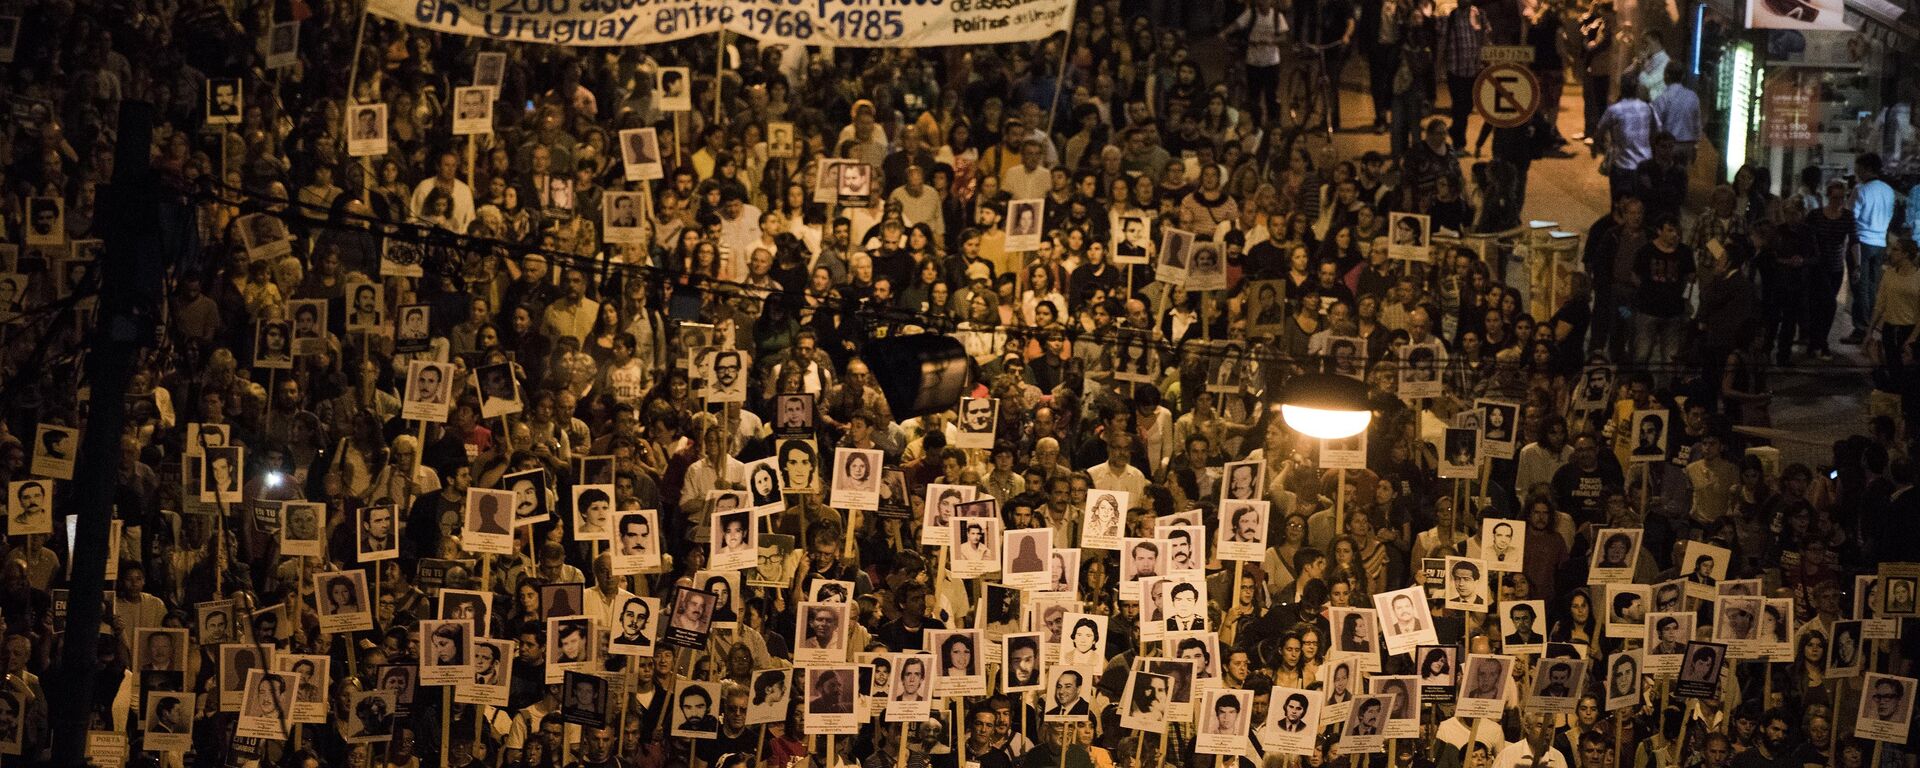 Demonstrators take part in the 20th March of Silence in Montevideo, Uruguay, Wednesday, May 20, 2015.  - Sputnik Mundo, 1920, 19.05.2021